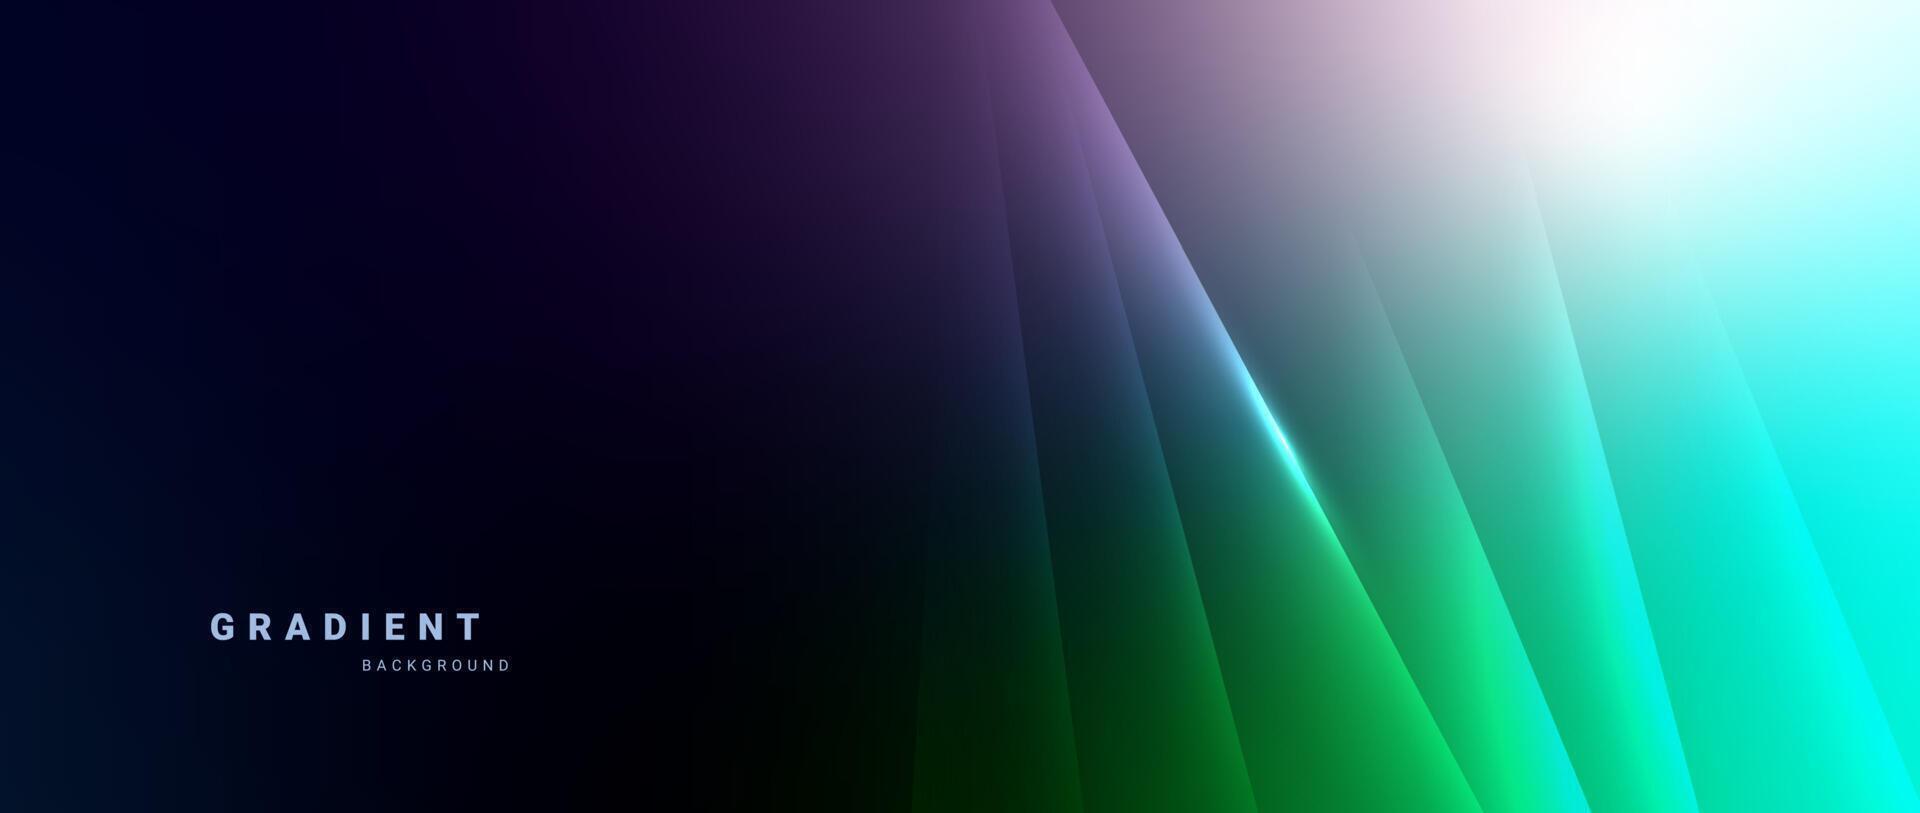 gradient background with green and blue colors vector